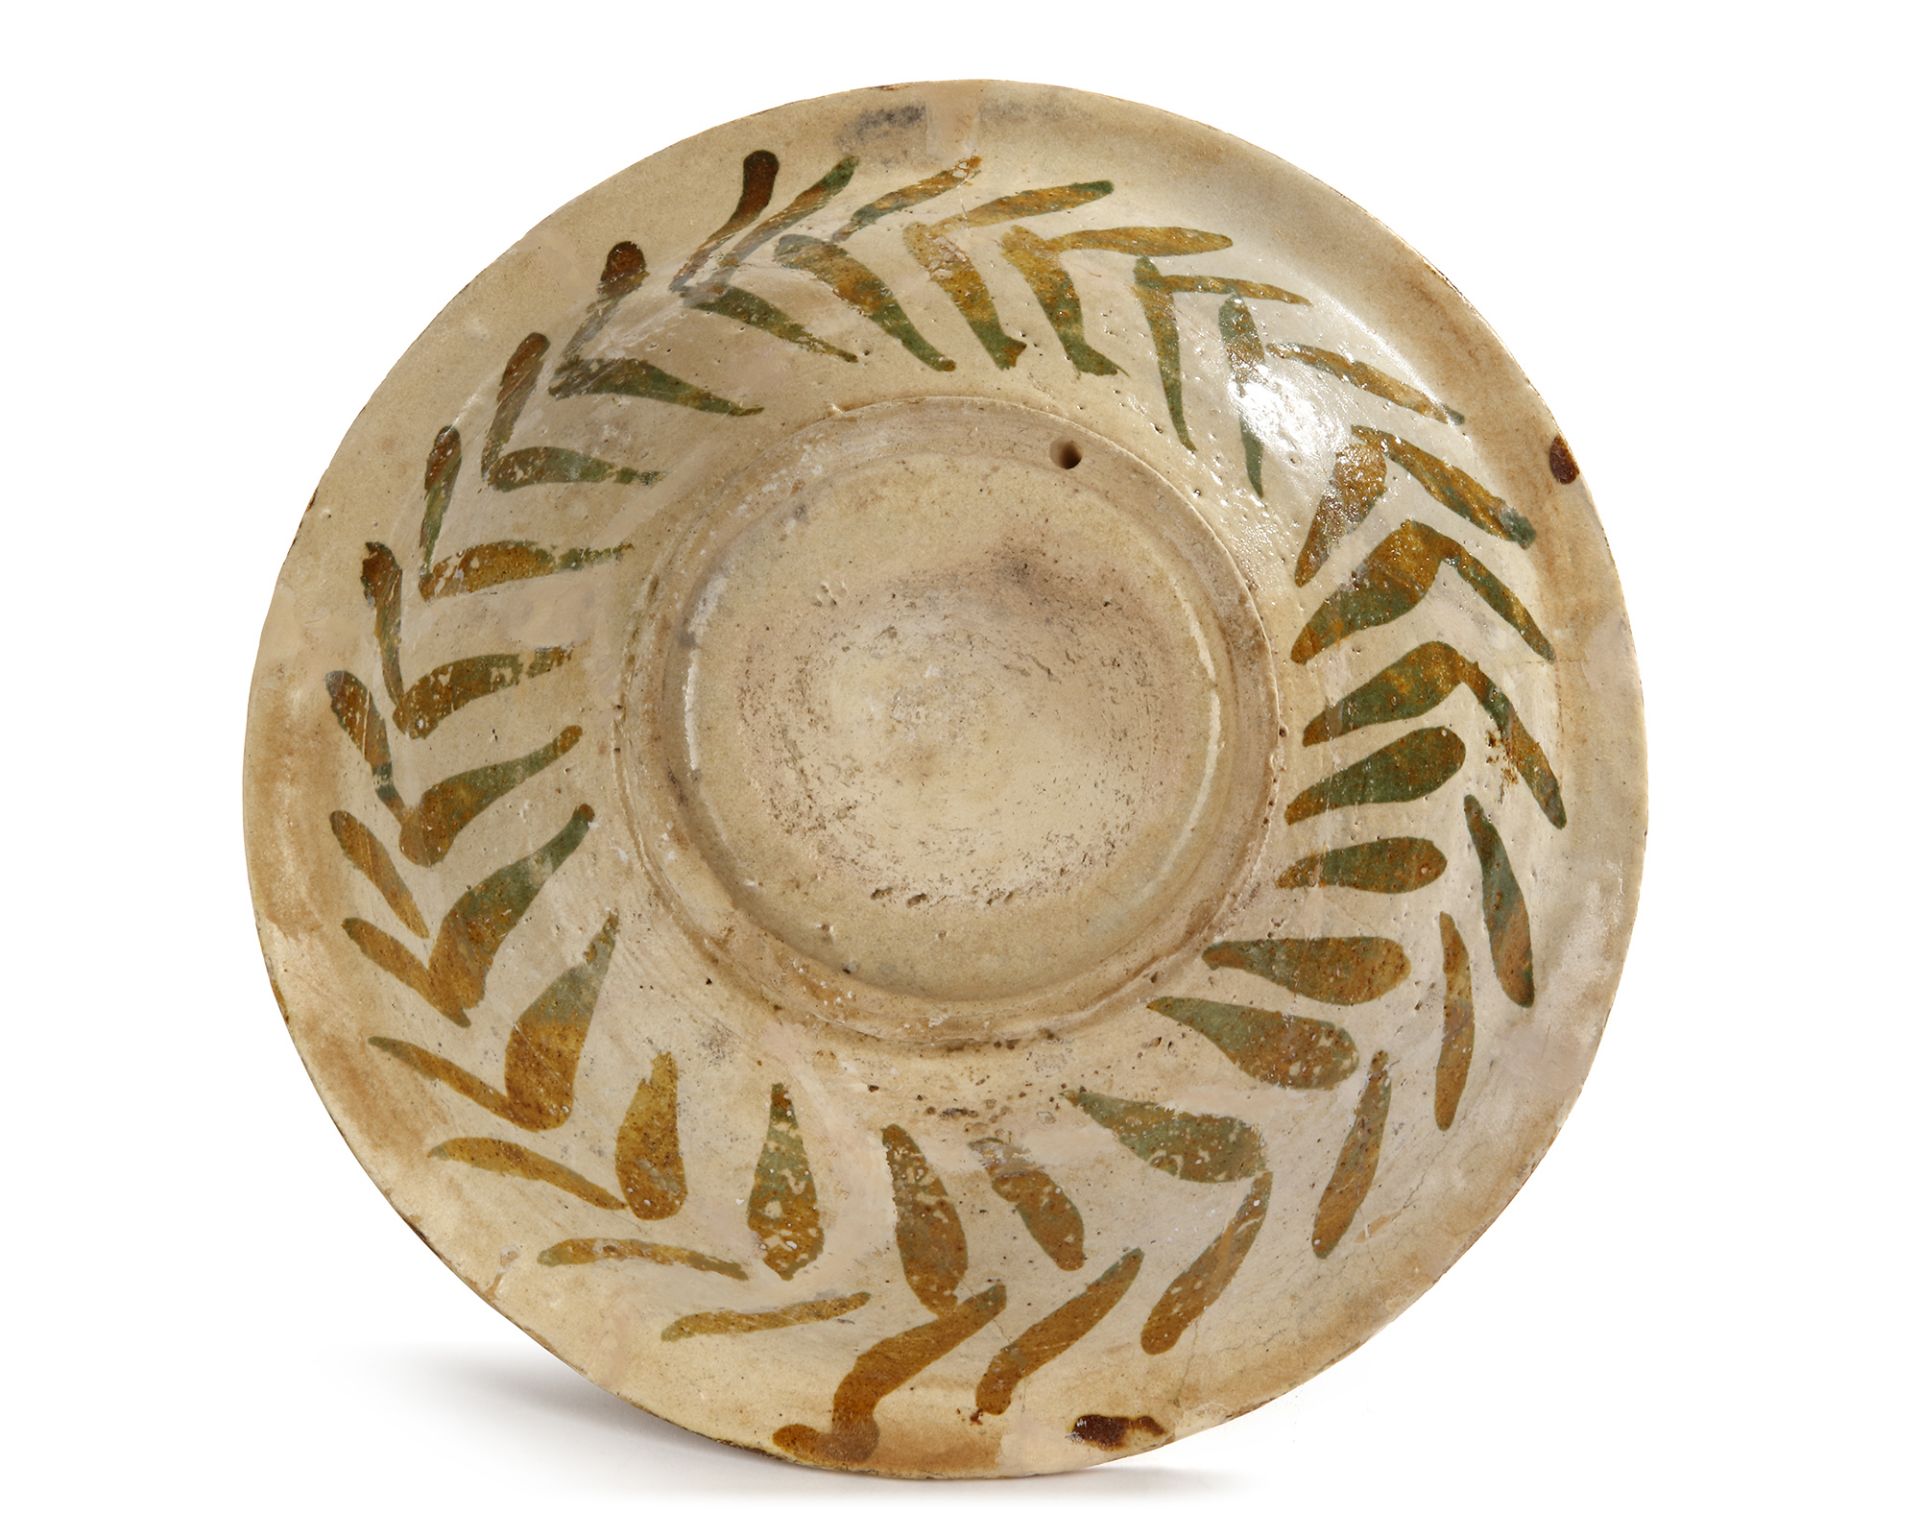 A FIGURAL ABBASID LUSTRE BOWL, MESOPOTAMIA OR CENTRAL ASIA, 9TH CENTURY - Image 7 of 8